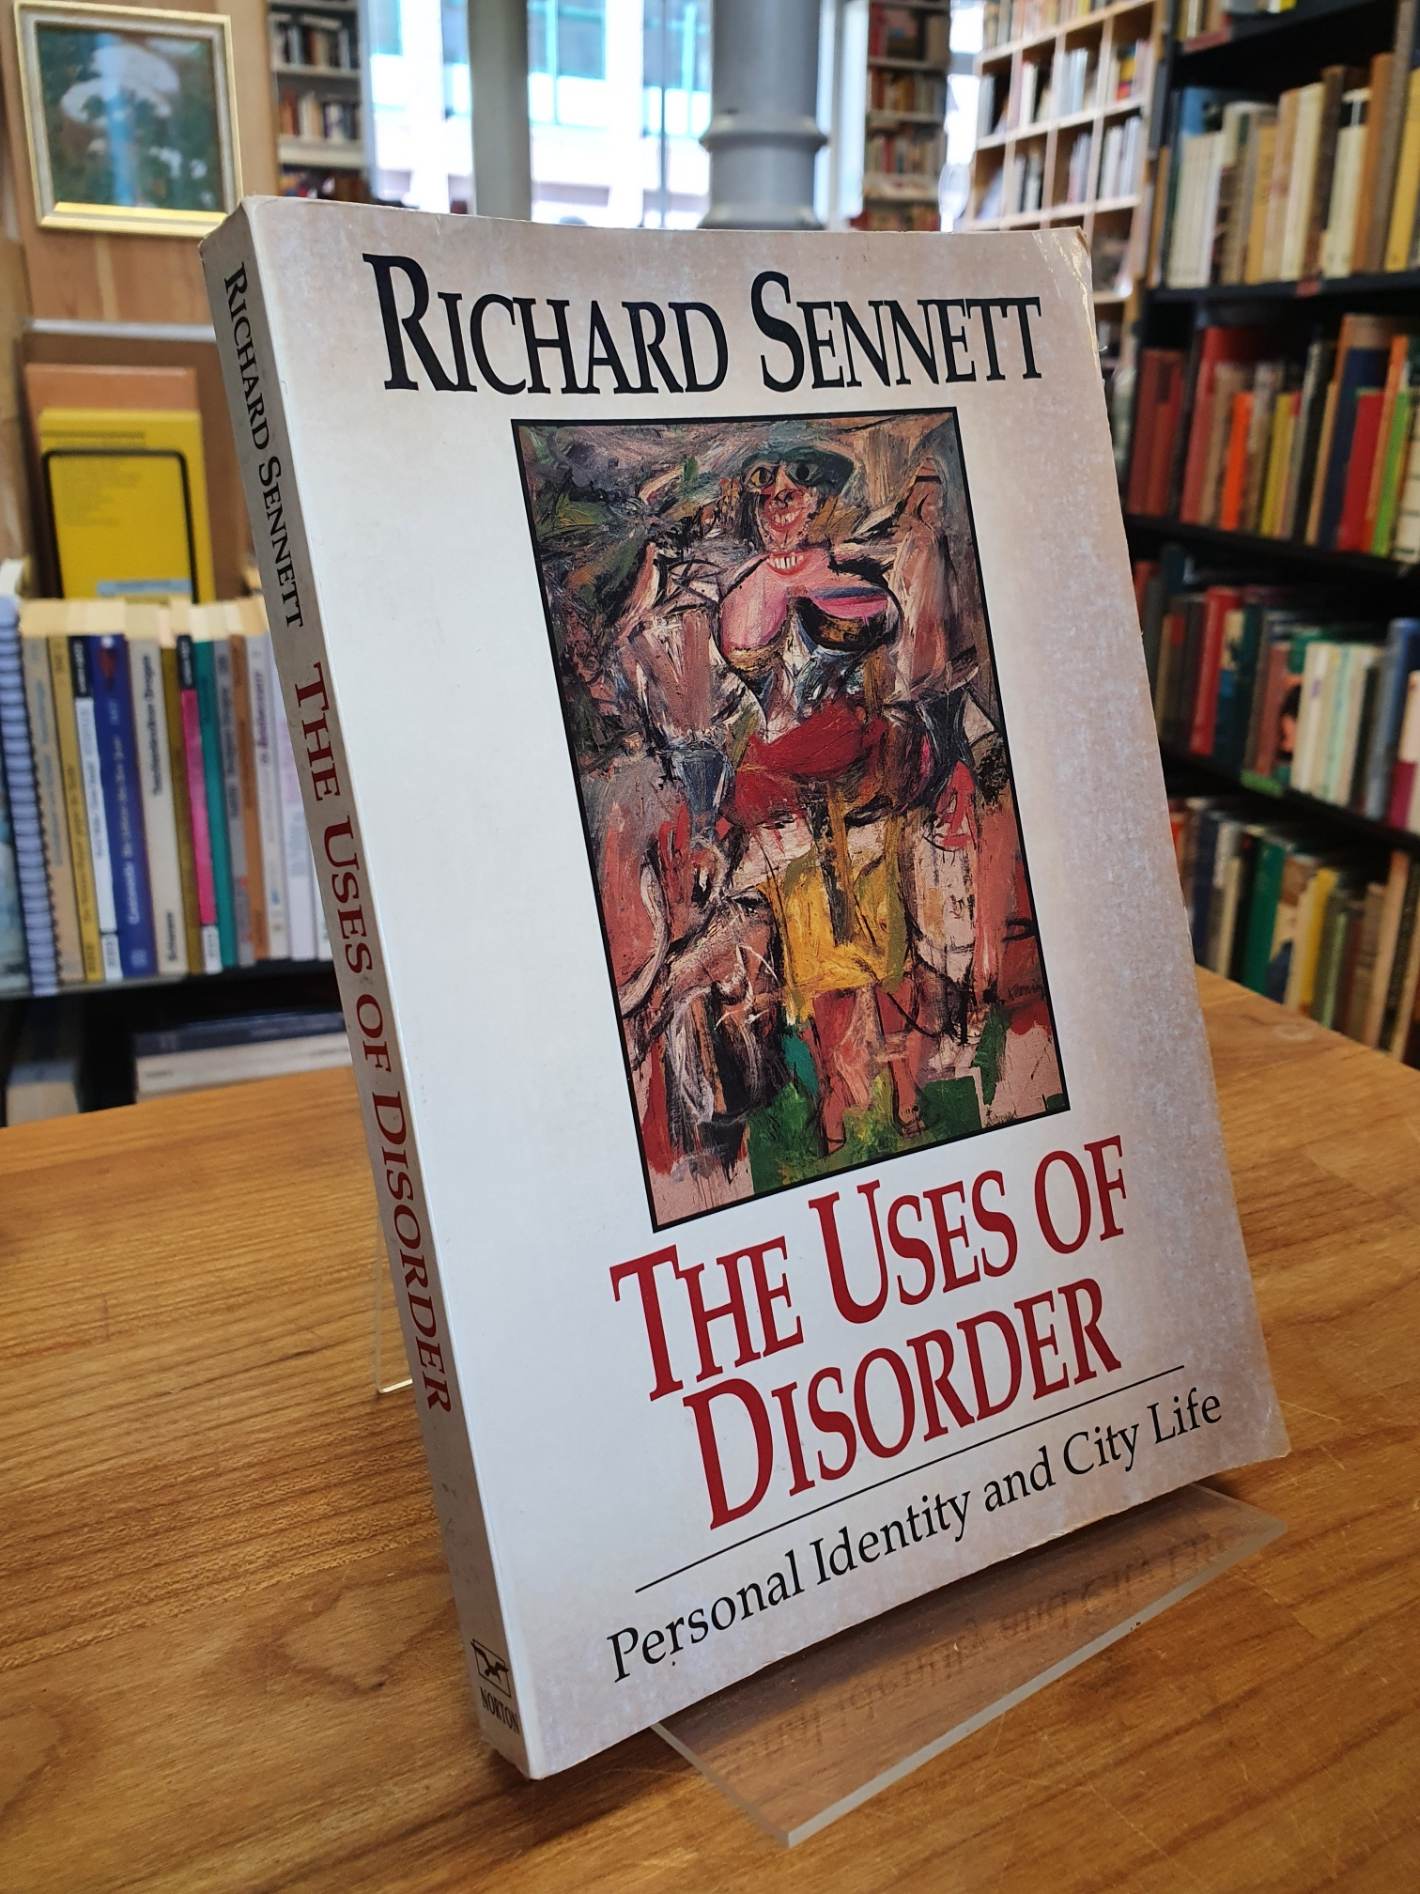 Sennett, The Uses Of Disorder – Personal Identity & City Life,